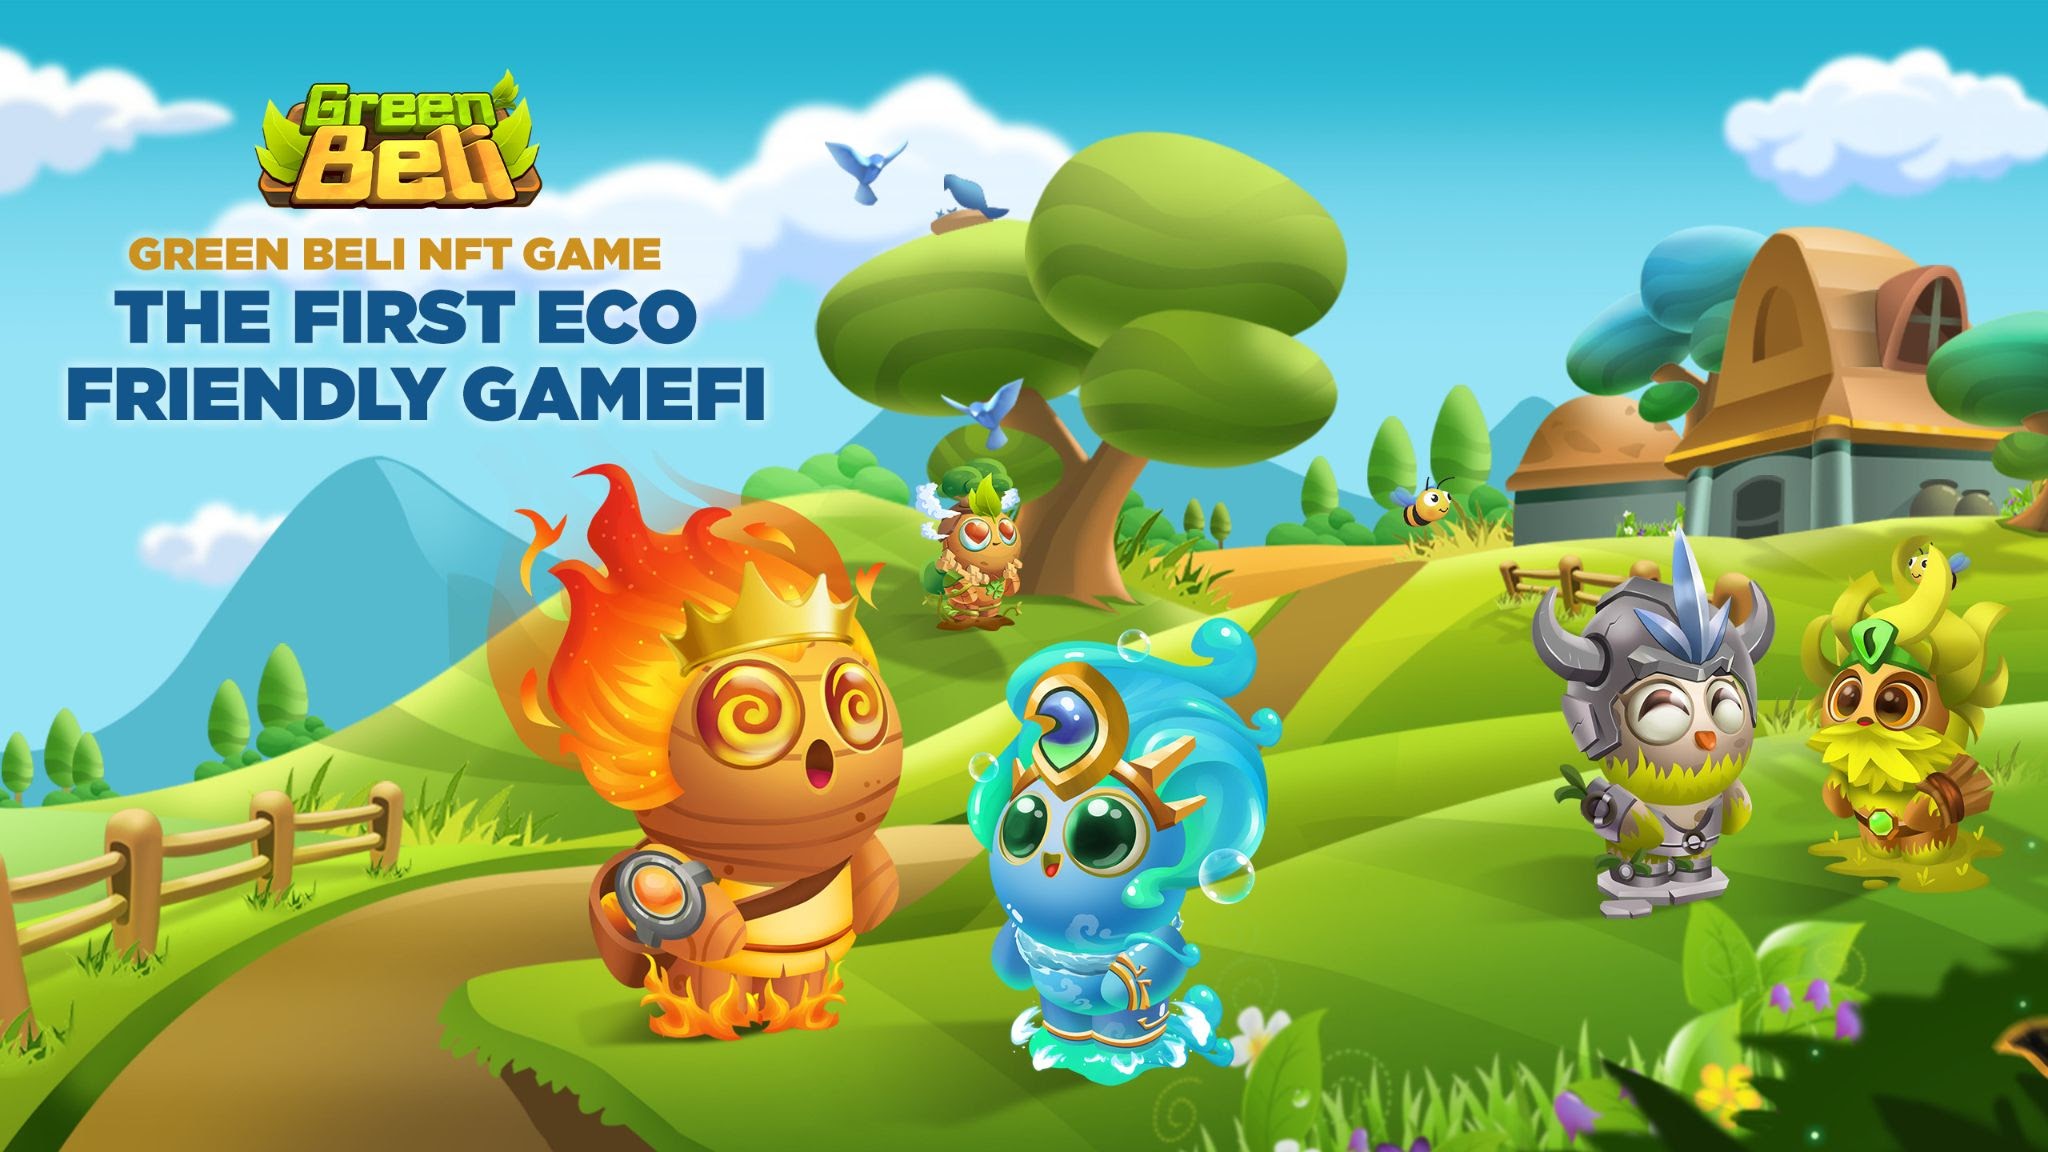 Green Beli NFT Game Strives To Save The Earth